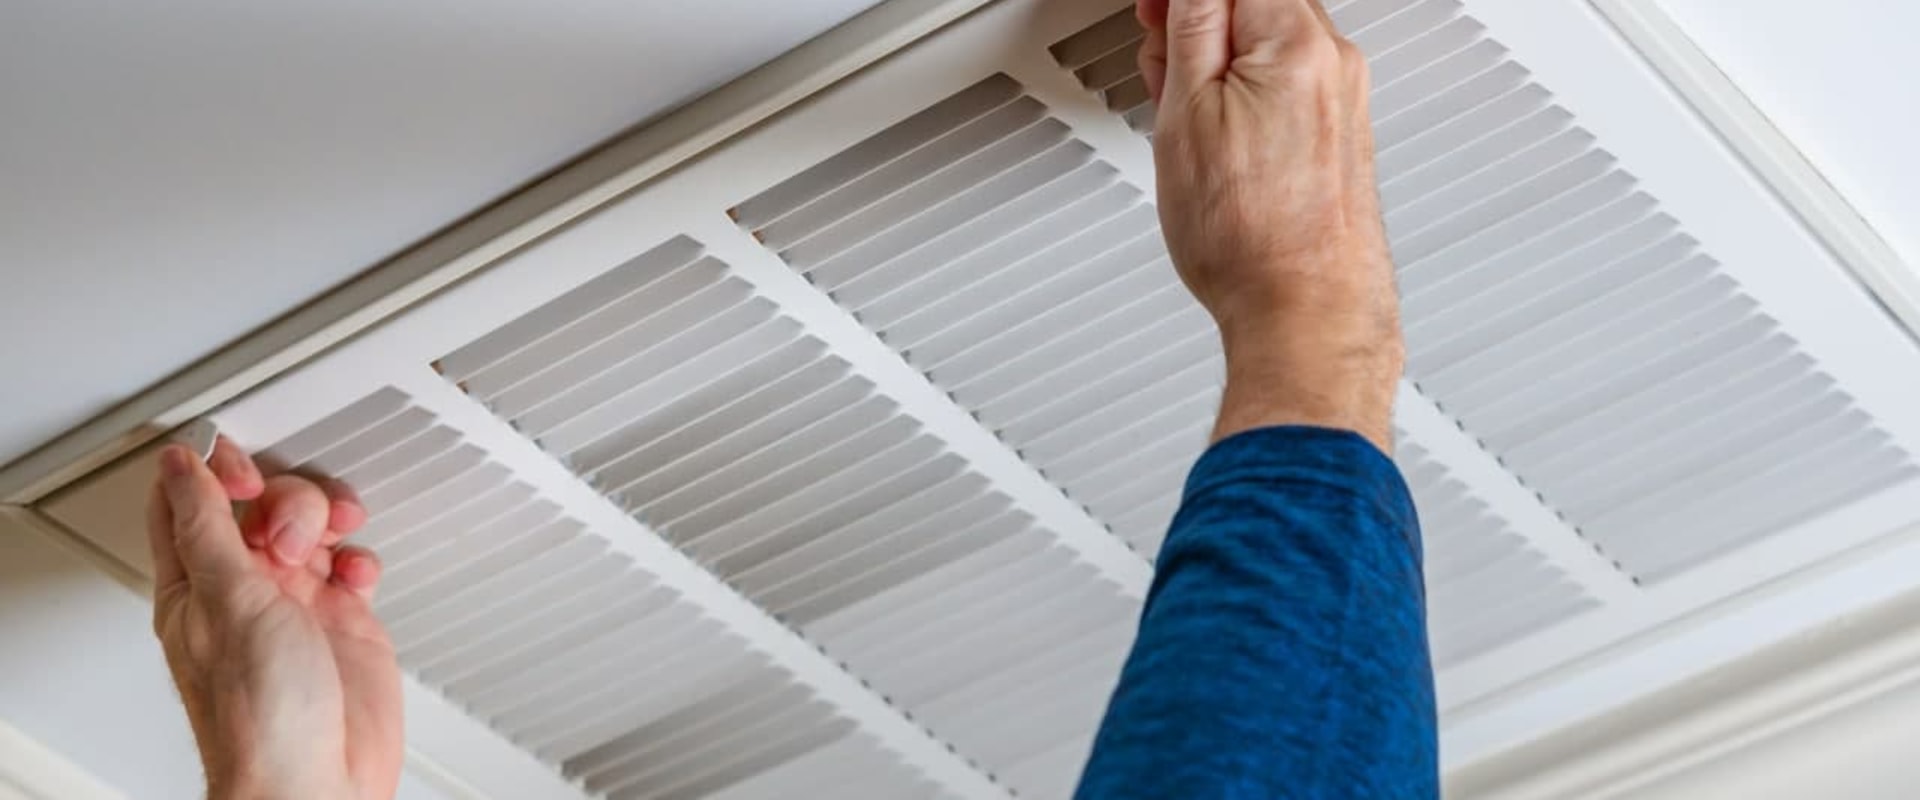 Why Does My Home Have Two Air Filters?